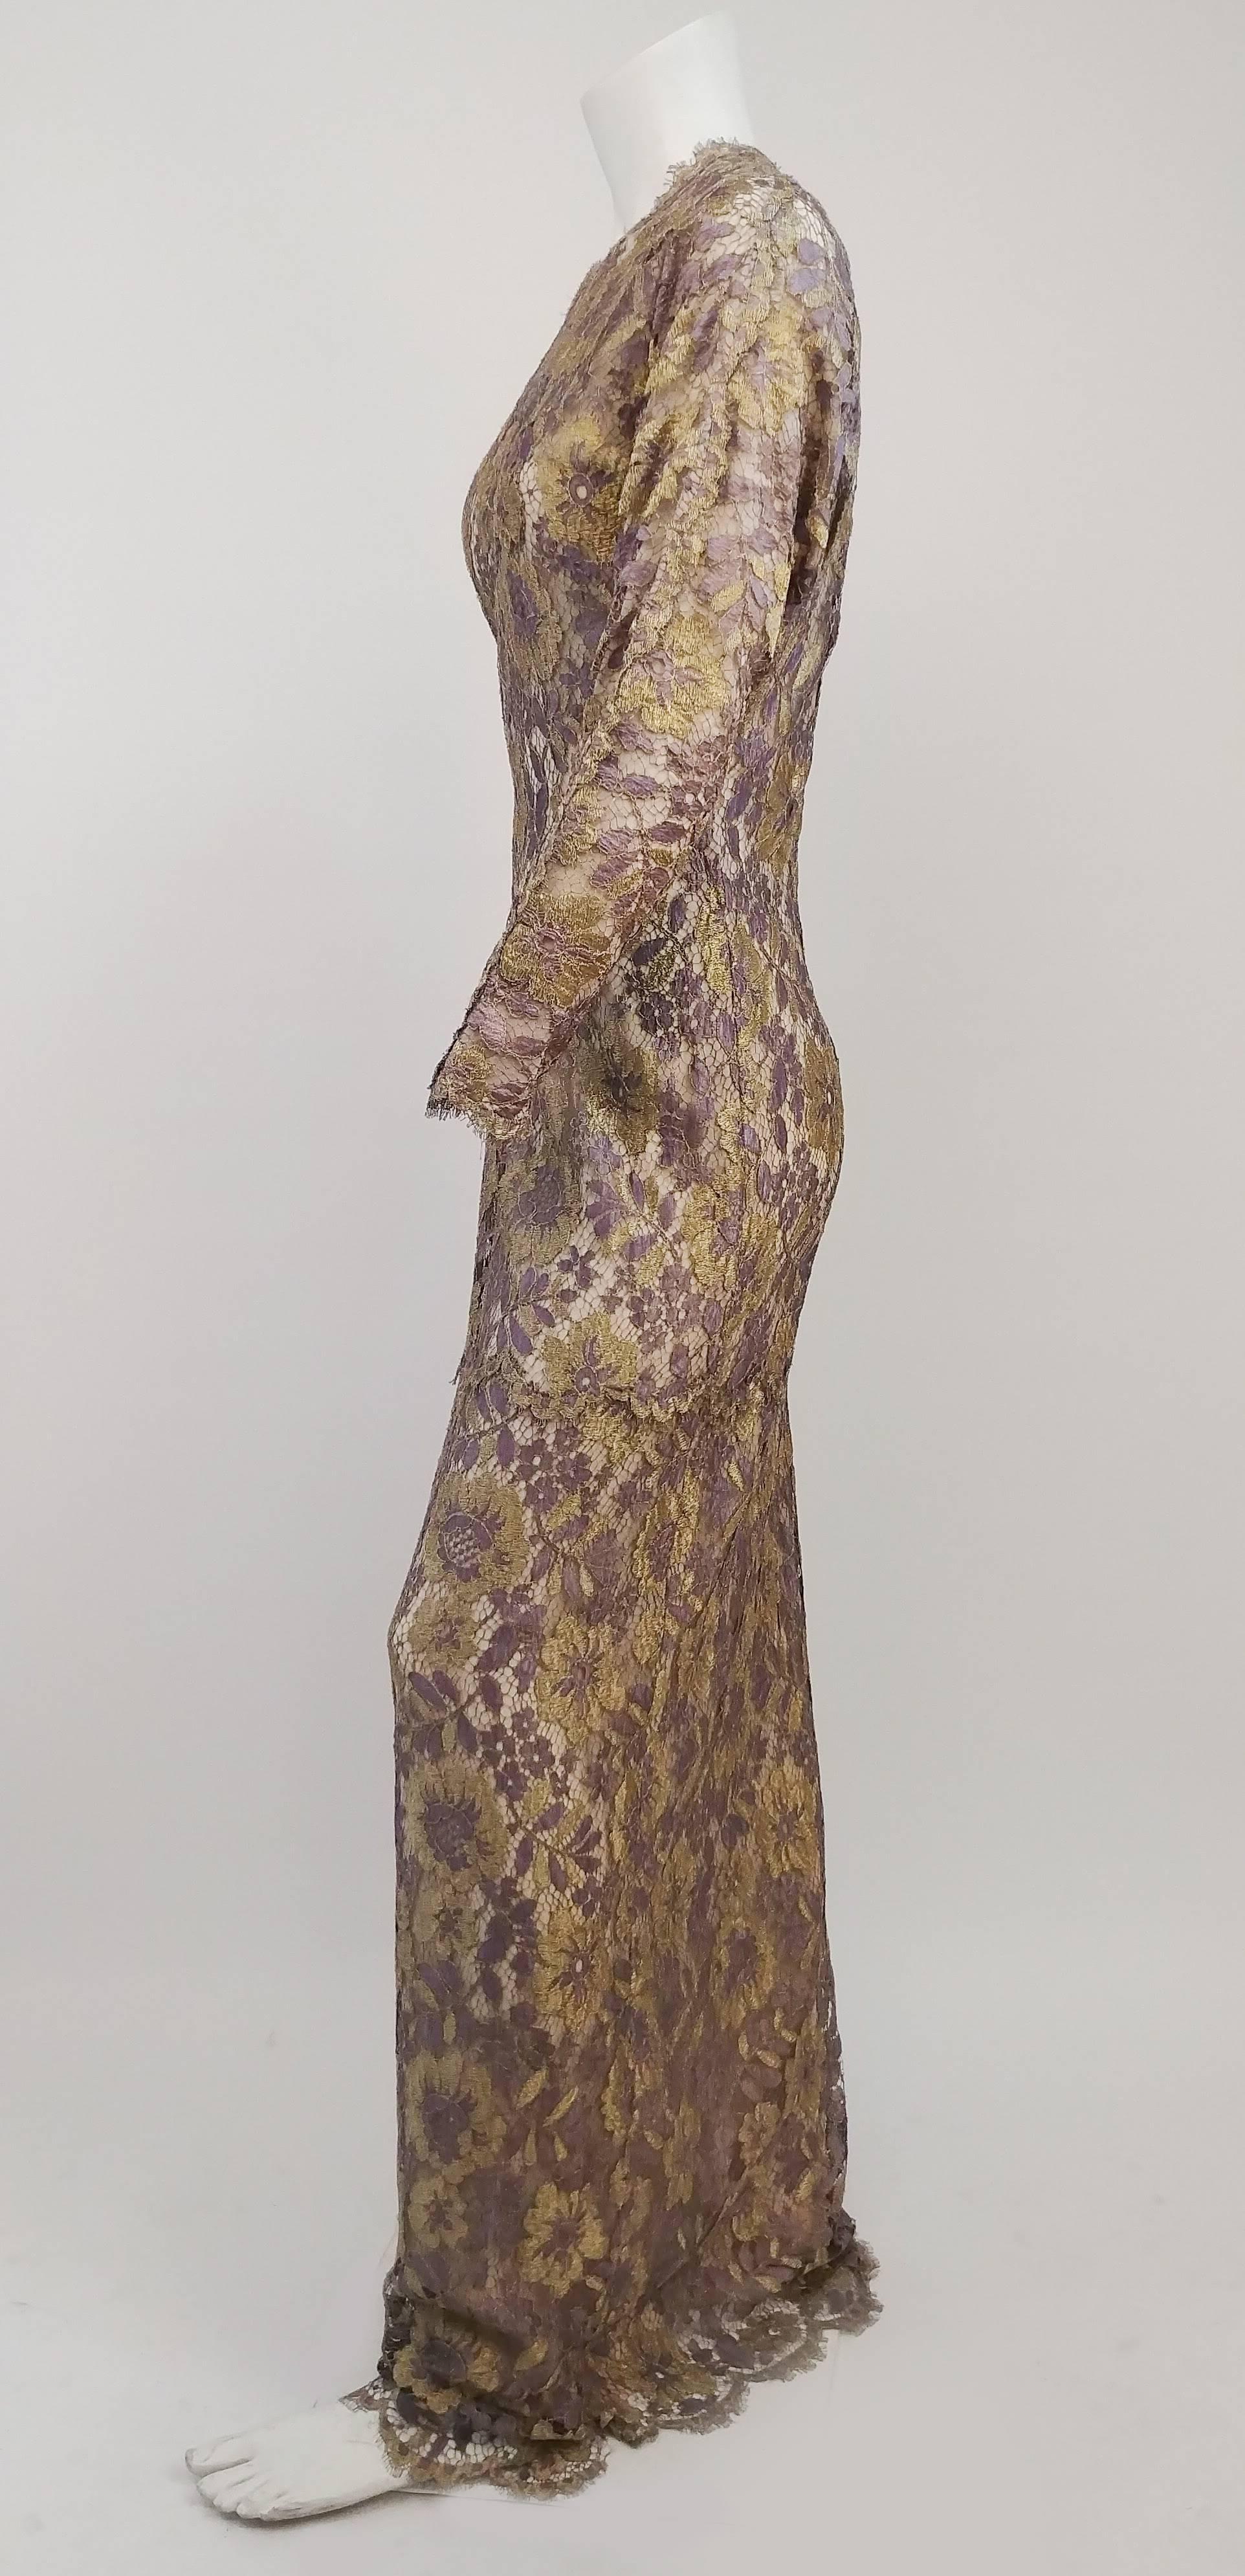 70s Metallic Gold and Purple Lace Evening Dress. Dolman sleeves. Lace overlay on nude mesh lining. 